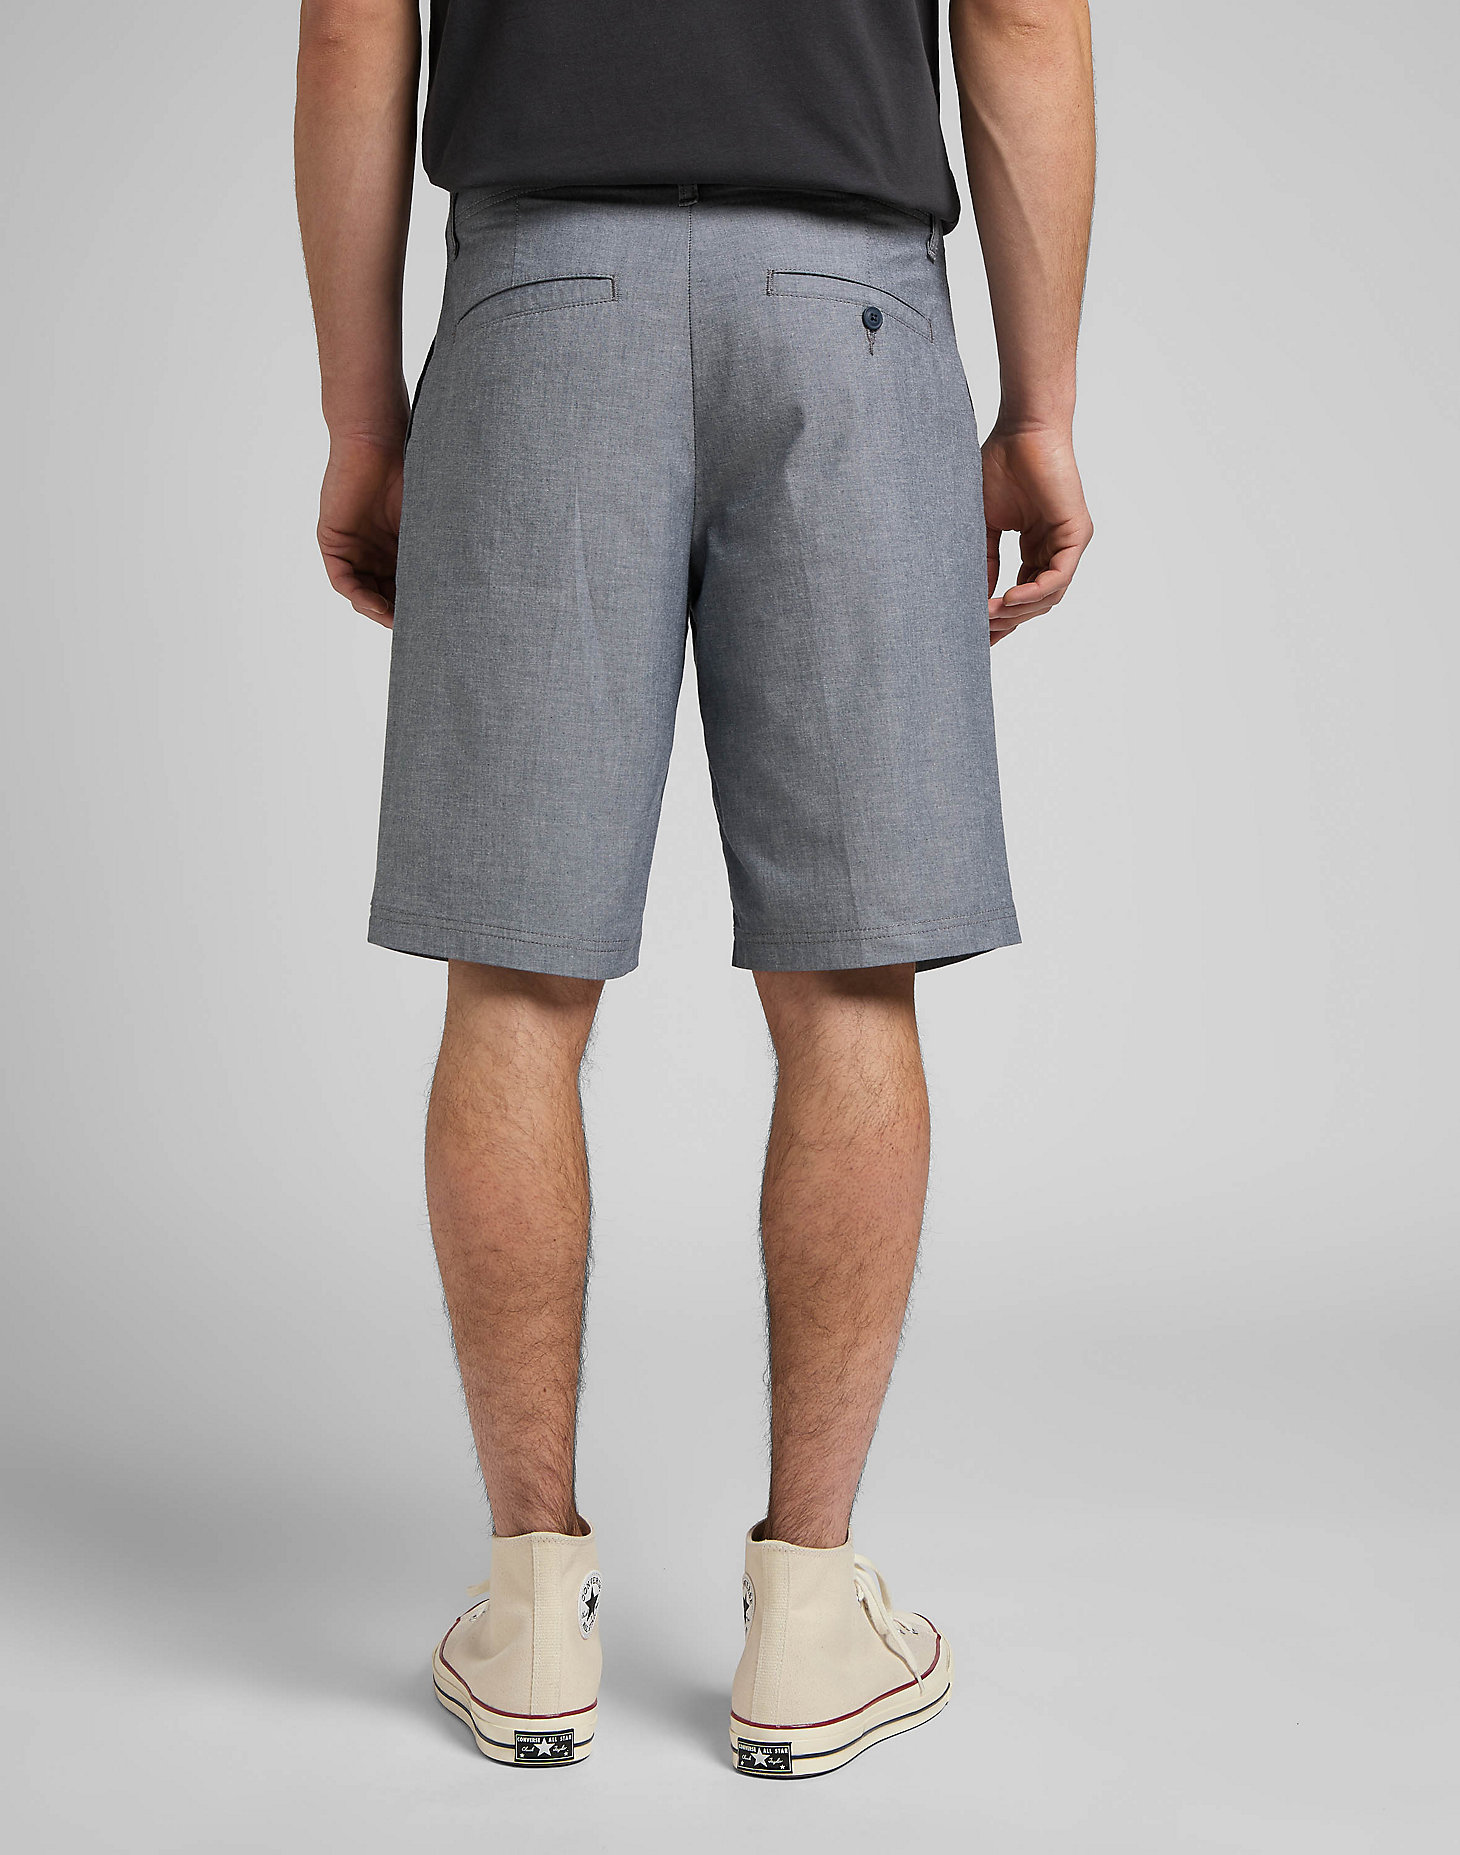 Extreme Comfort Chino Short in Chambray alternative view 1